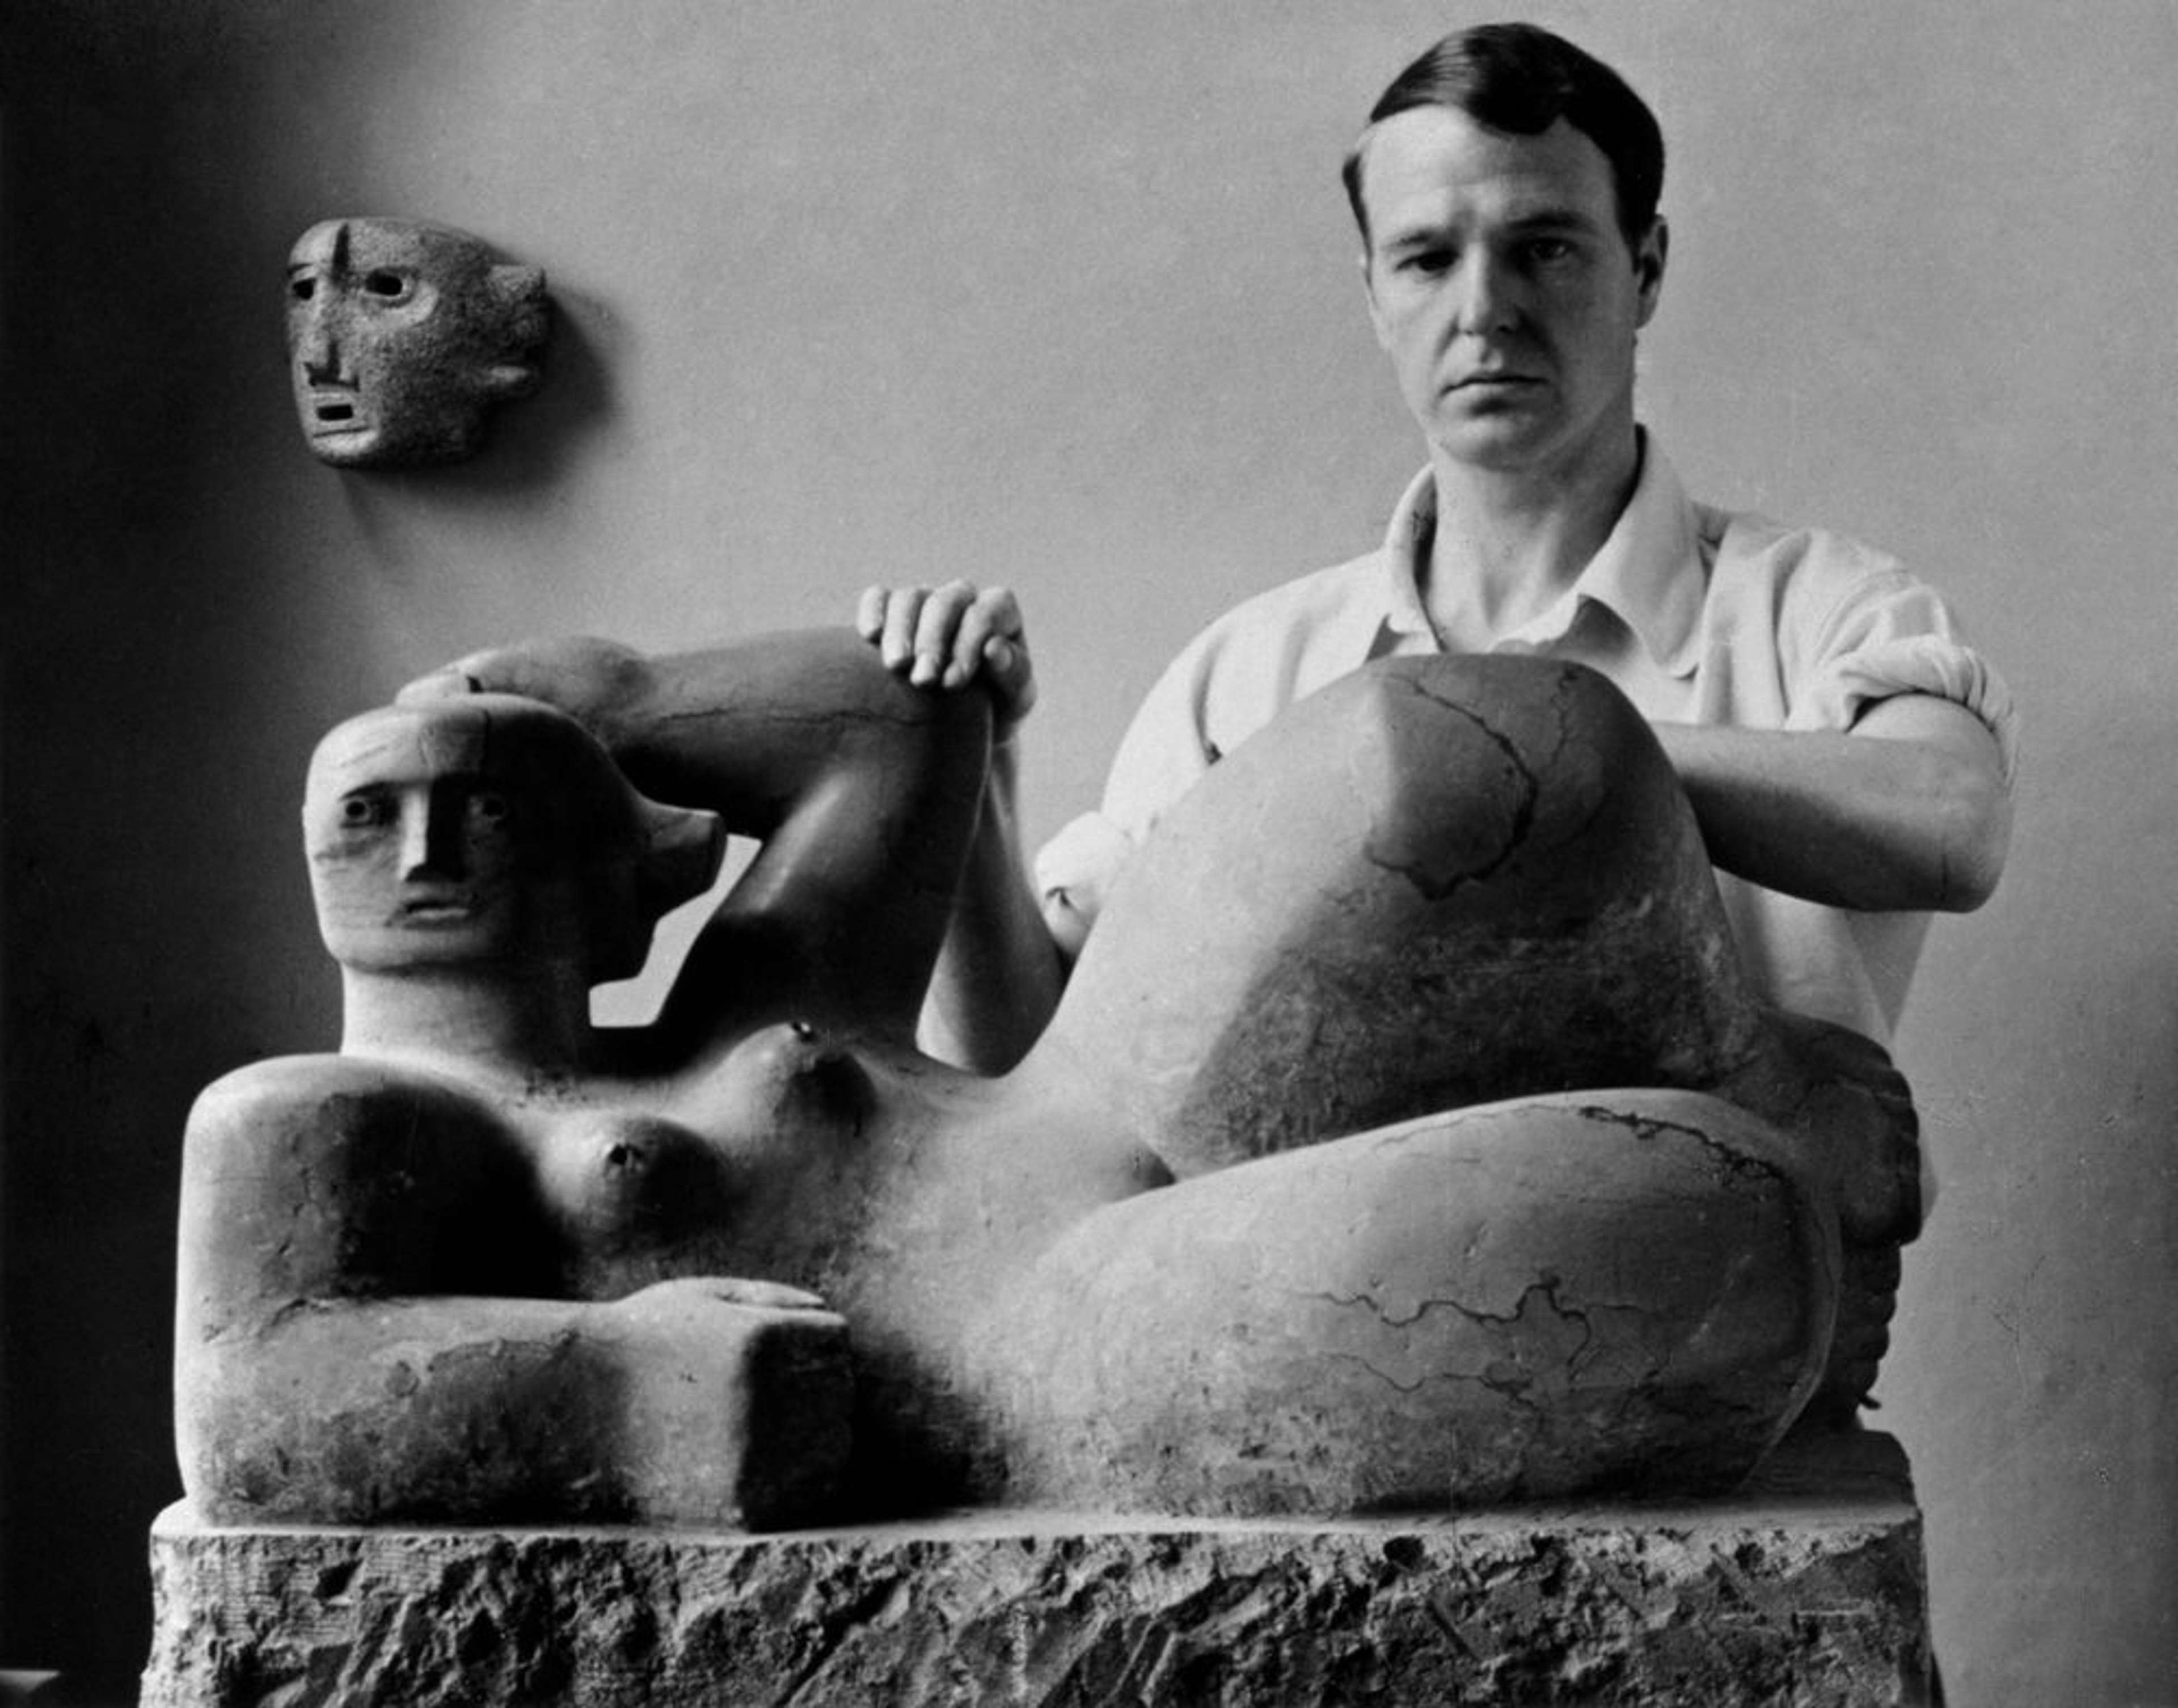 Black-and-white photograph of Henry Moore standing next to a large-scale sculpture. Moore, wearing a white short-sleeve shirt, is positioned beside the abstracted reclining figures sculpture. His hands rest on the raised elbow and knee of the artwork as he gazes directly at the camera.